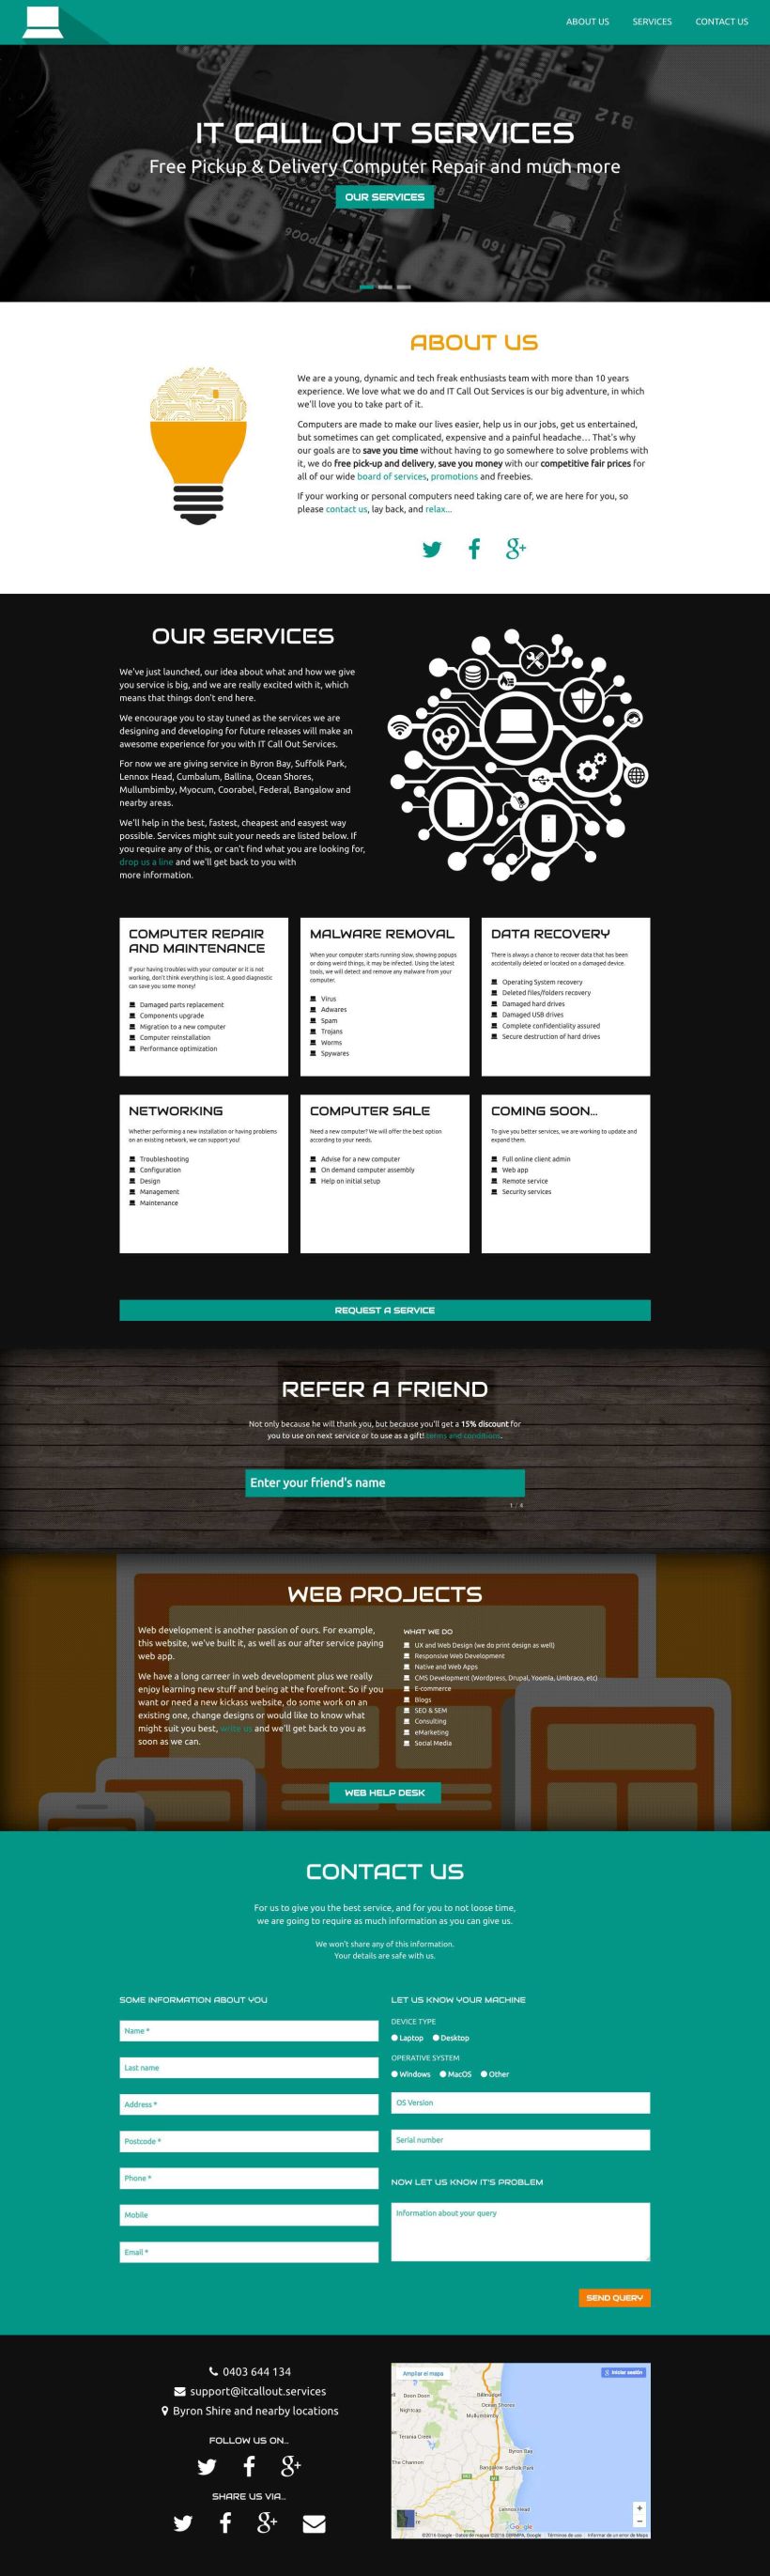 Nuevo proyectoIT Callout Services -1